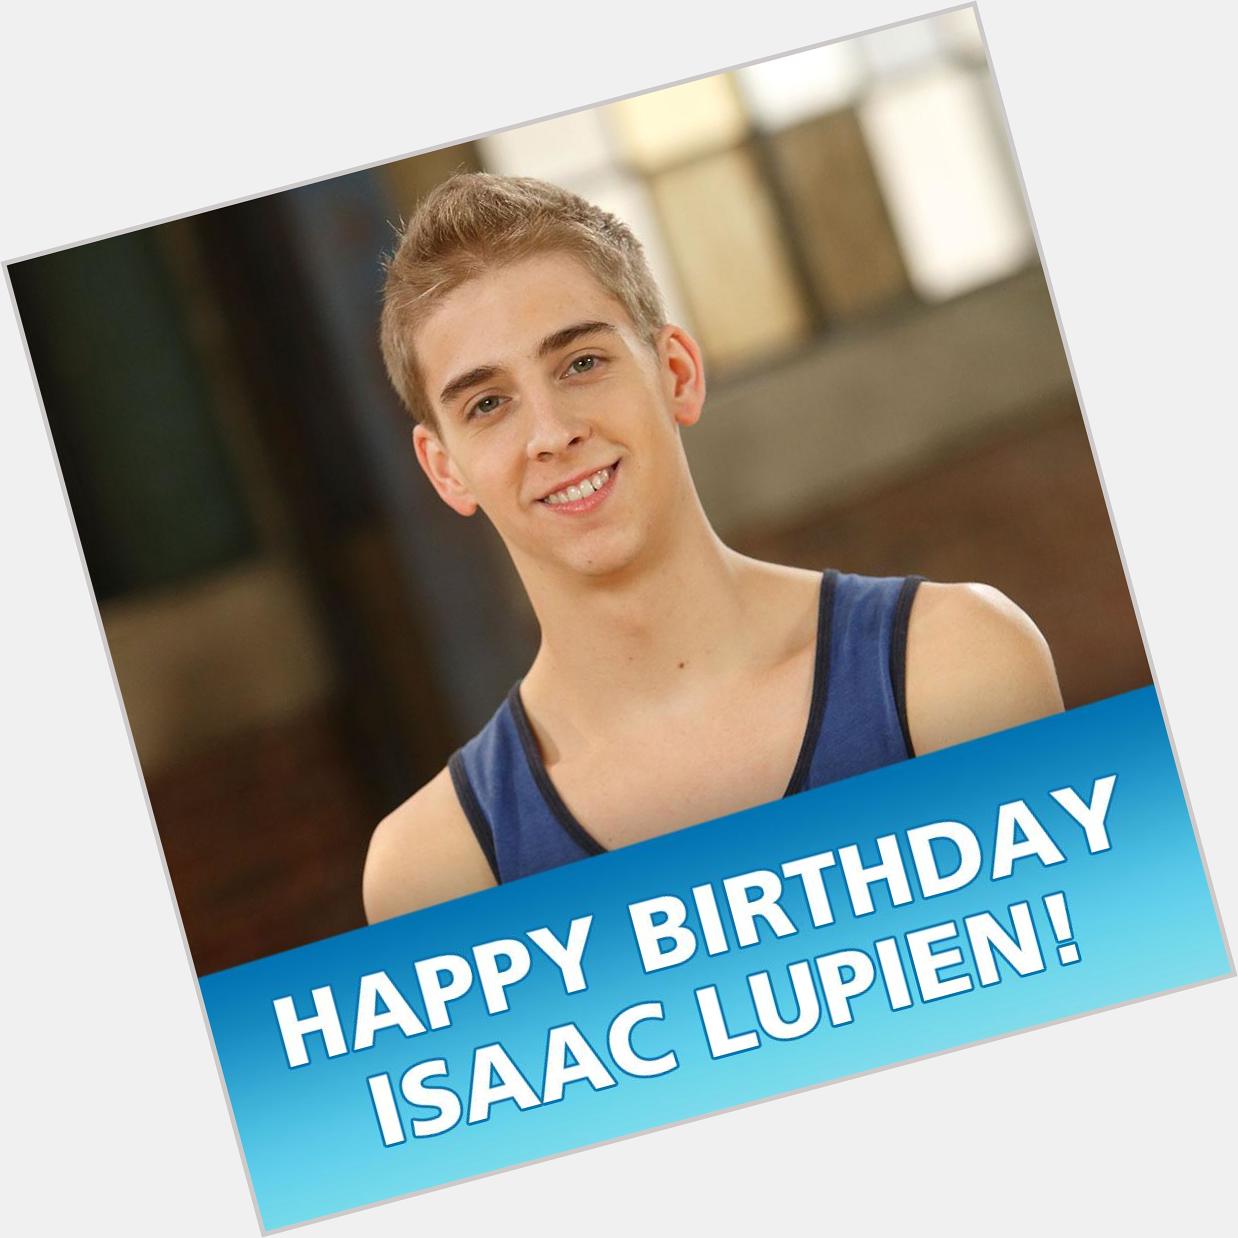 Happy Birthday to our friend Isaac Lupien! 